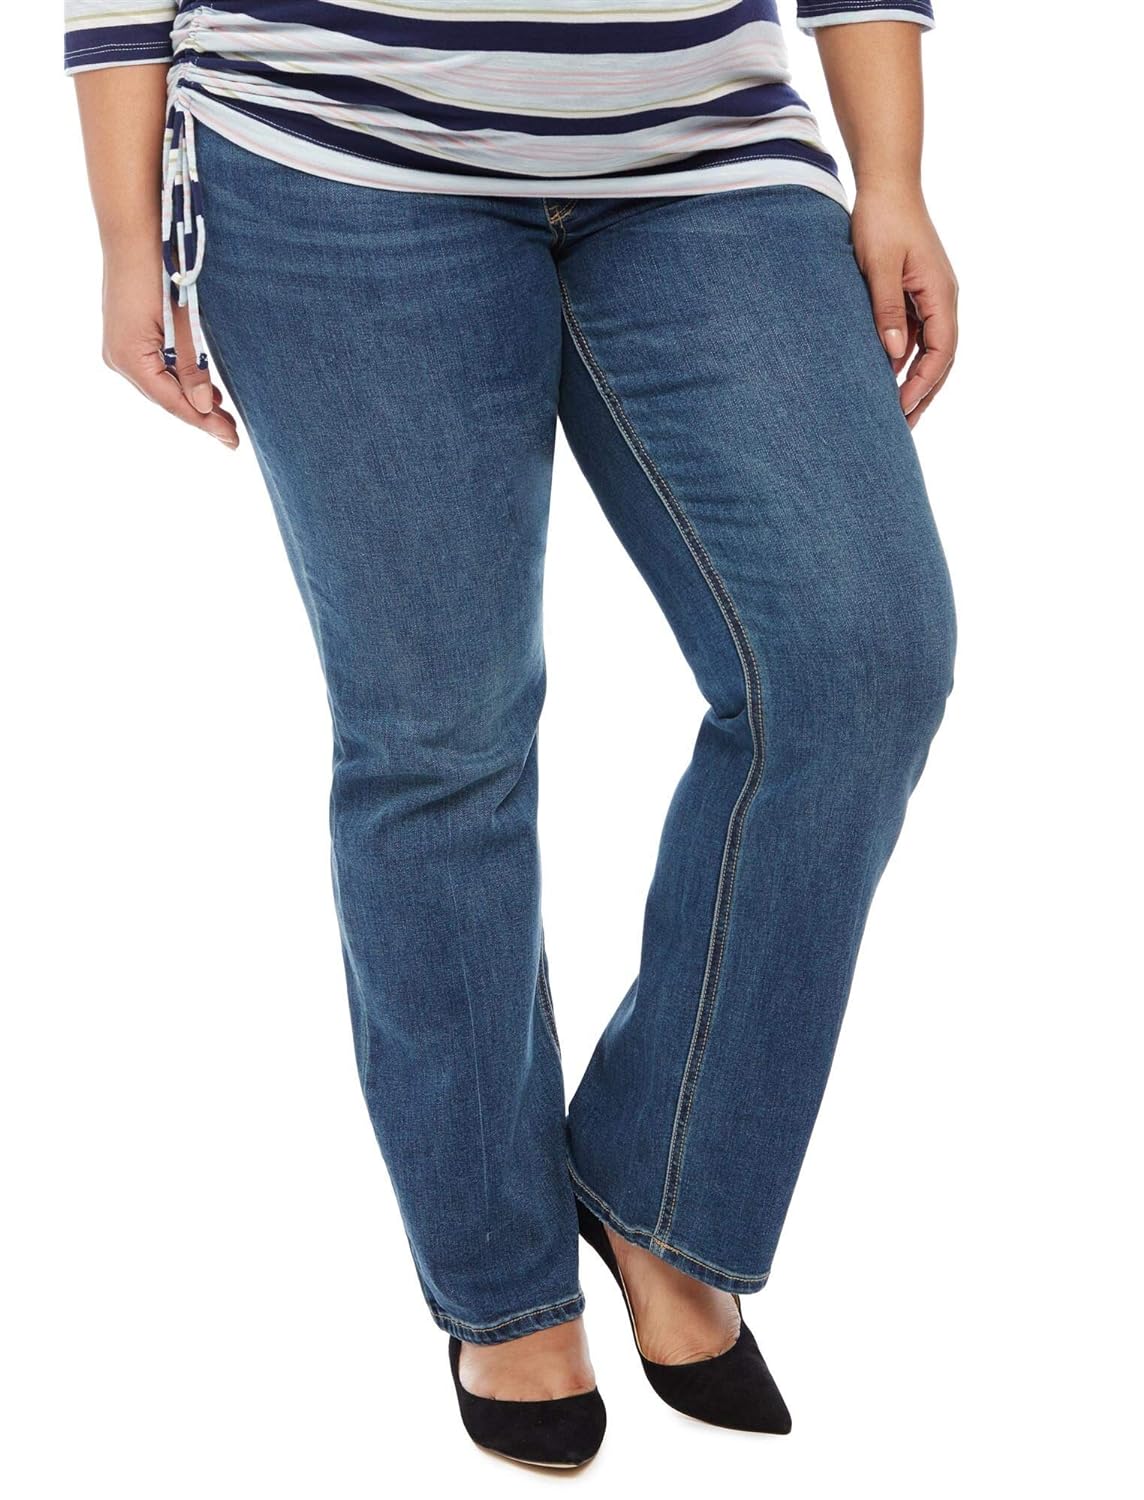 Best Plus-Size Maternity Jeans in 2020 - Plus-Size Maternity Jeans ...